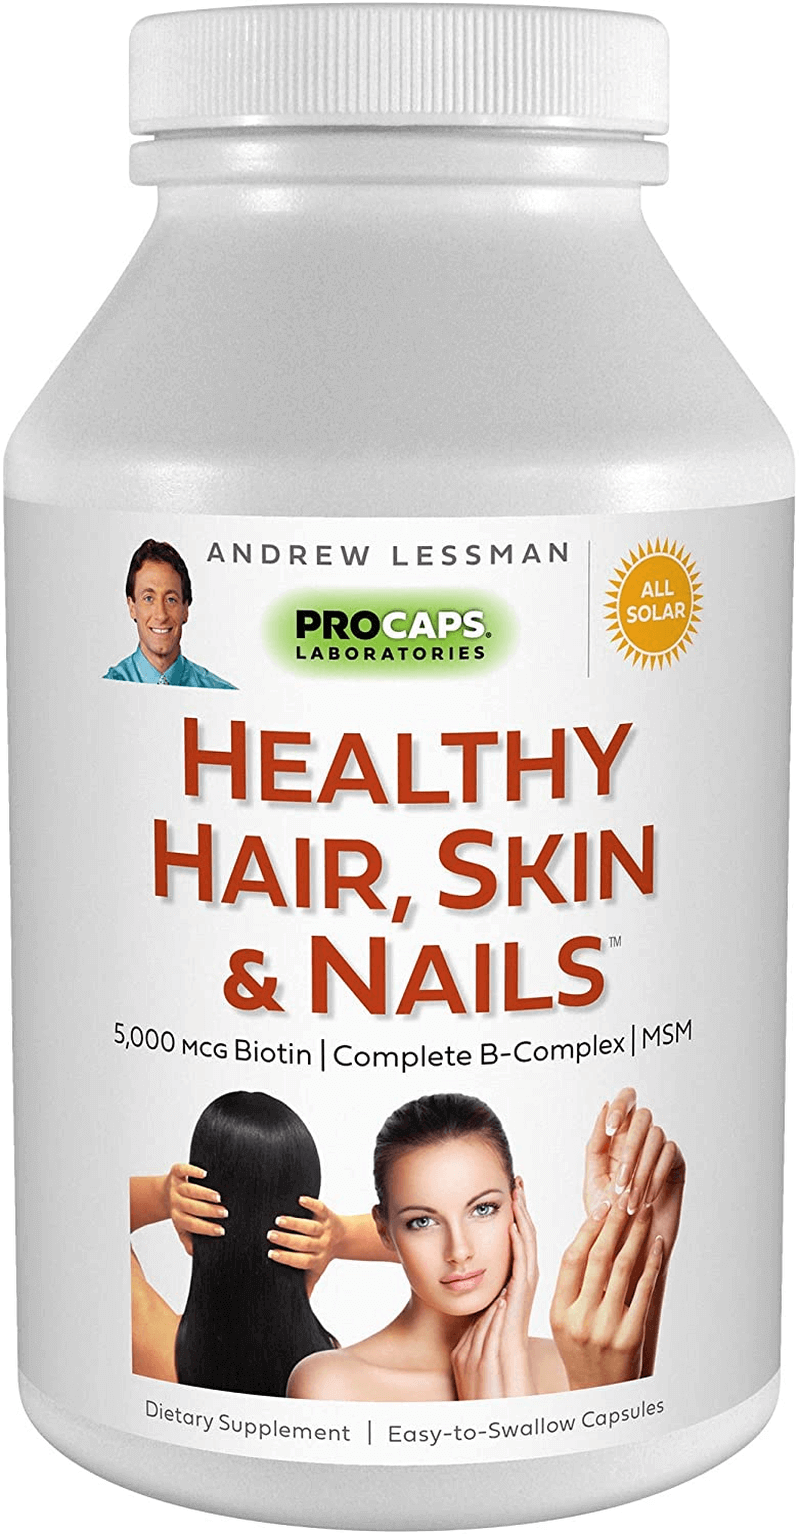 Andrew Lessman Healthy Hair, Skin & Nails 120 Capsules – 5000 Mcg High Bioactivity Biotin, MSM, Full B-Complex Promotes Beautiful Hair, Skin and Strong Nails - No Additives. Easy to Swallow Capsules - vitamenstore.com